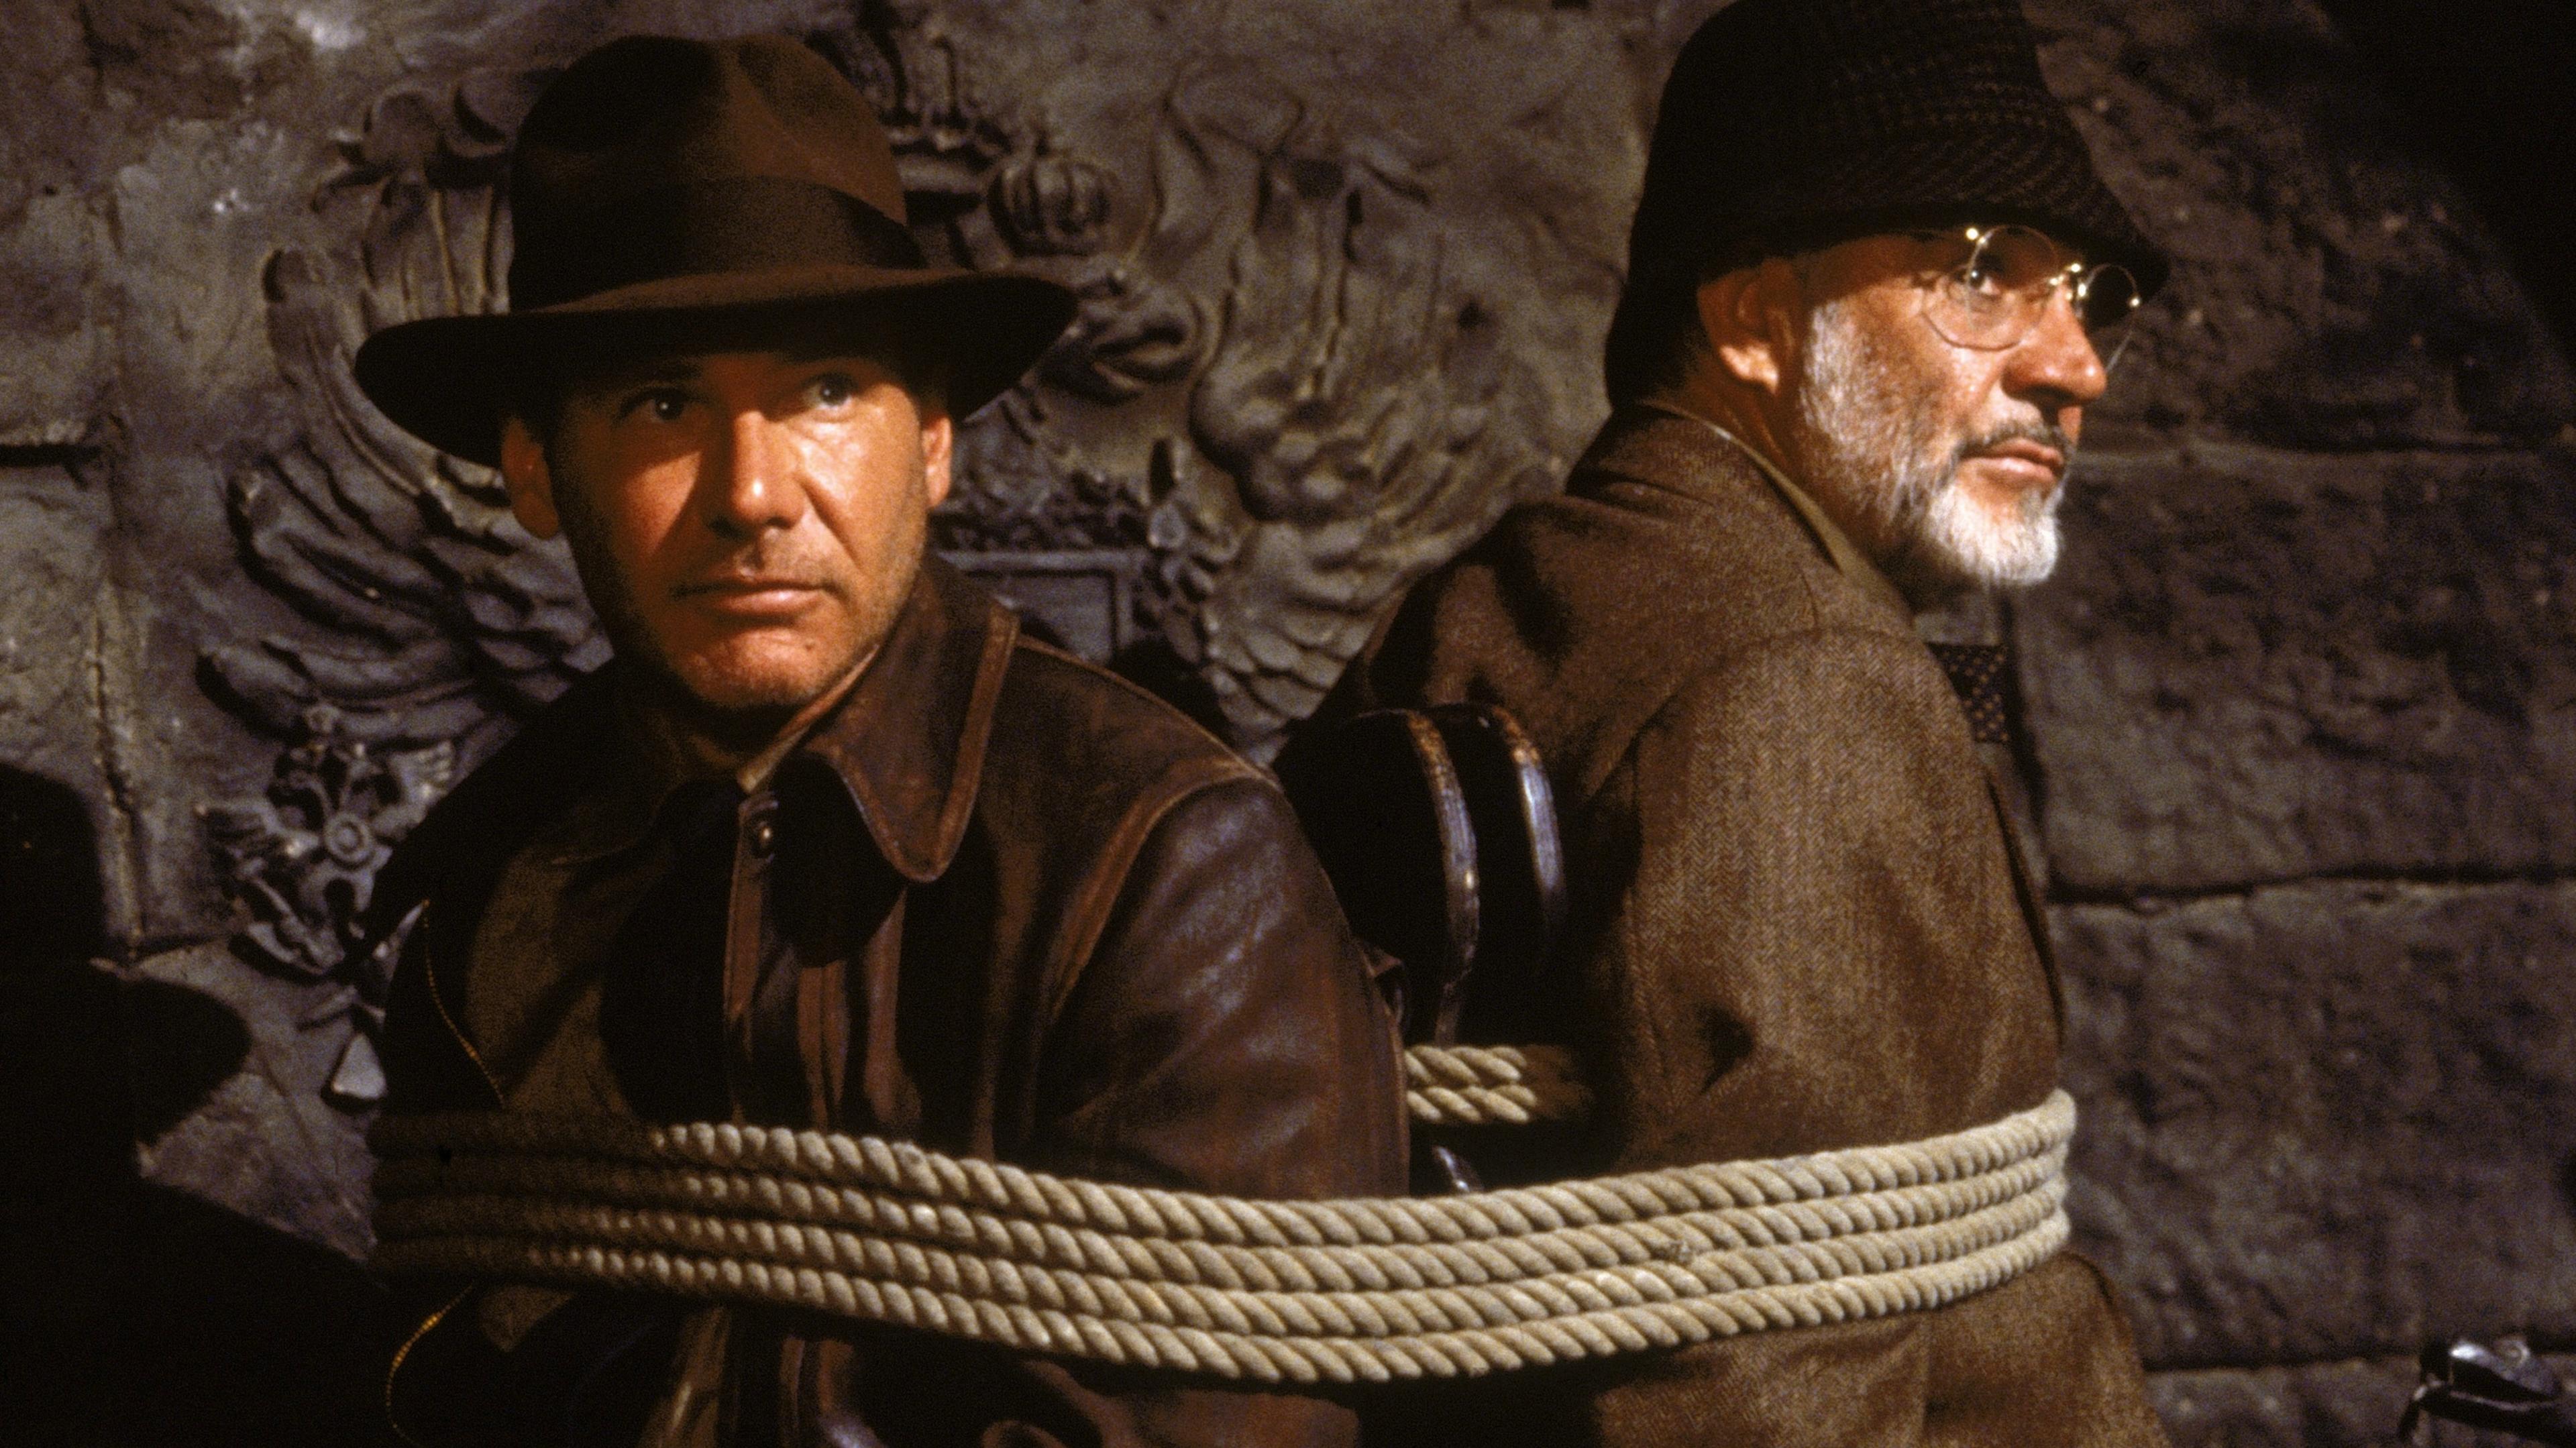 Harrison Ford and Sean Connery in Indiana Jones and the Last Crusade.